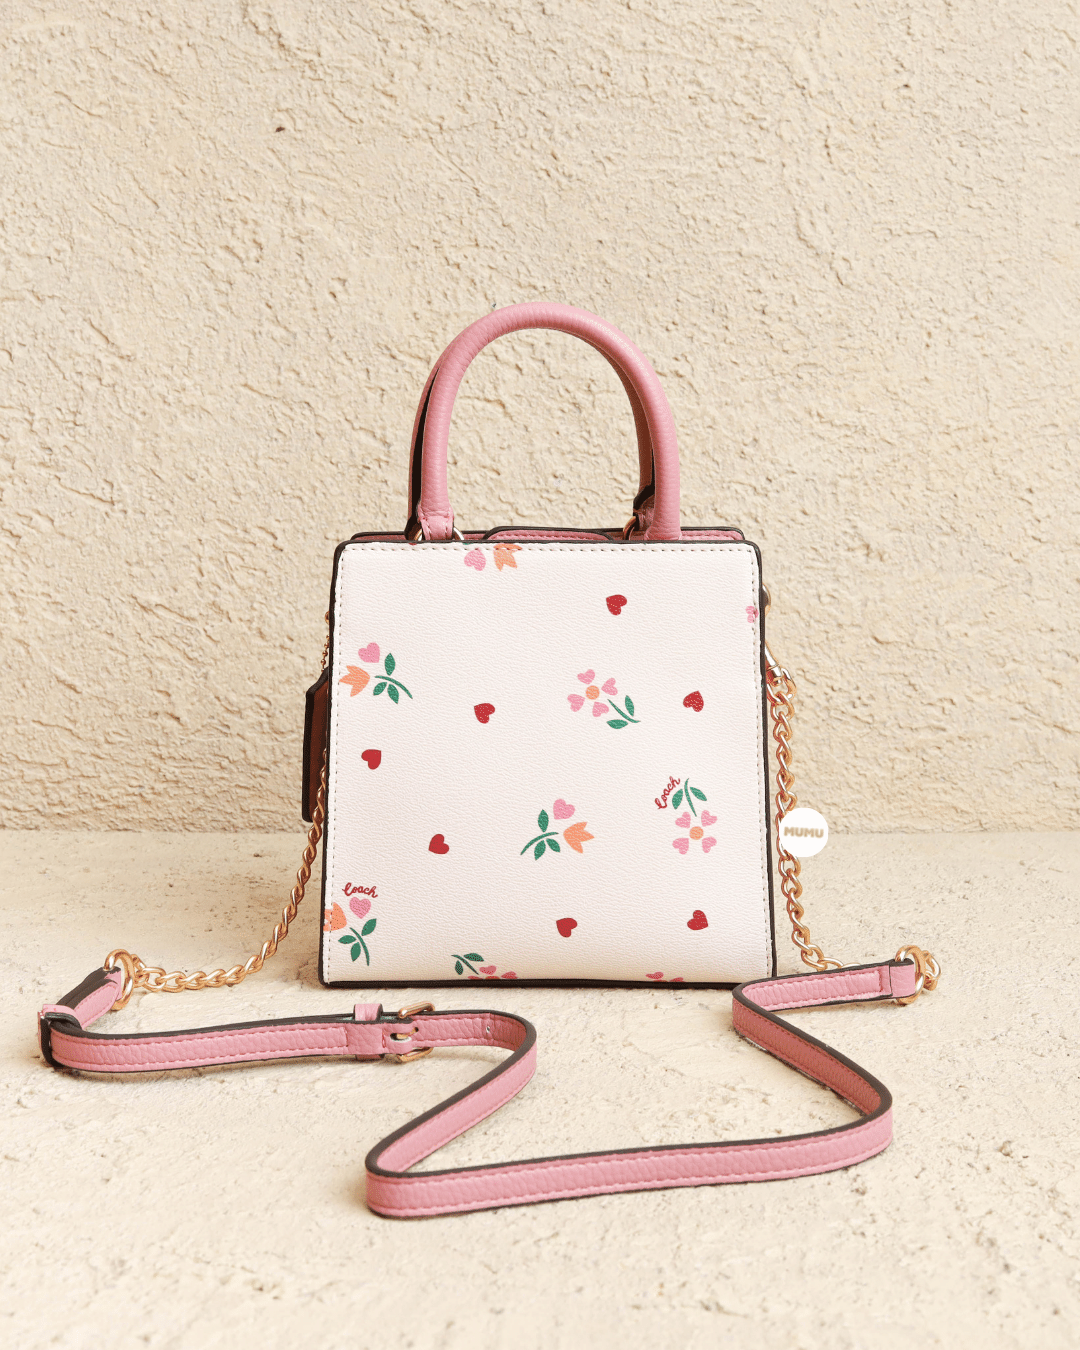 Coach Heart Crossbody In Signature Canvas With Heart Petal Print